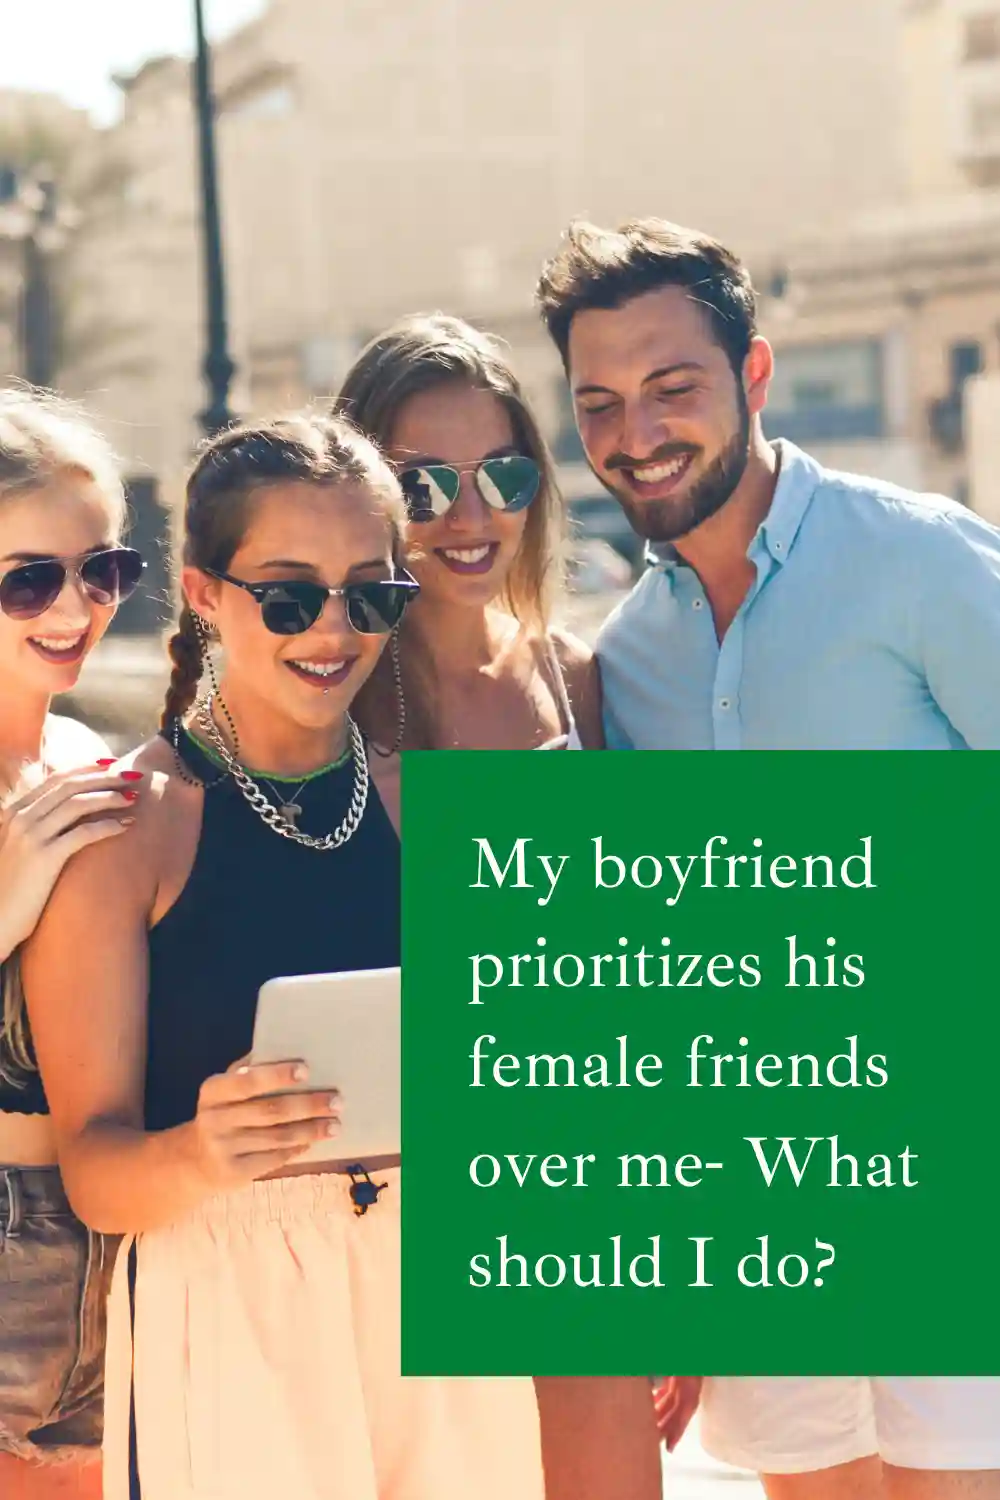 My boyfriend prioritizes his female friends over me- What should I do